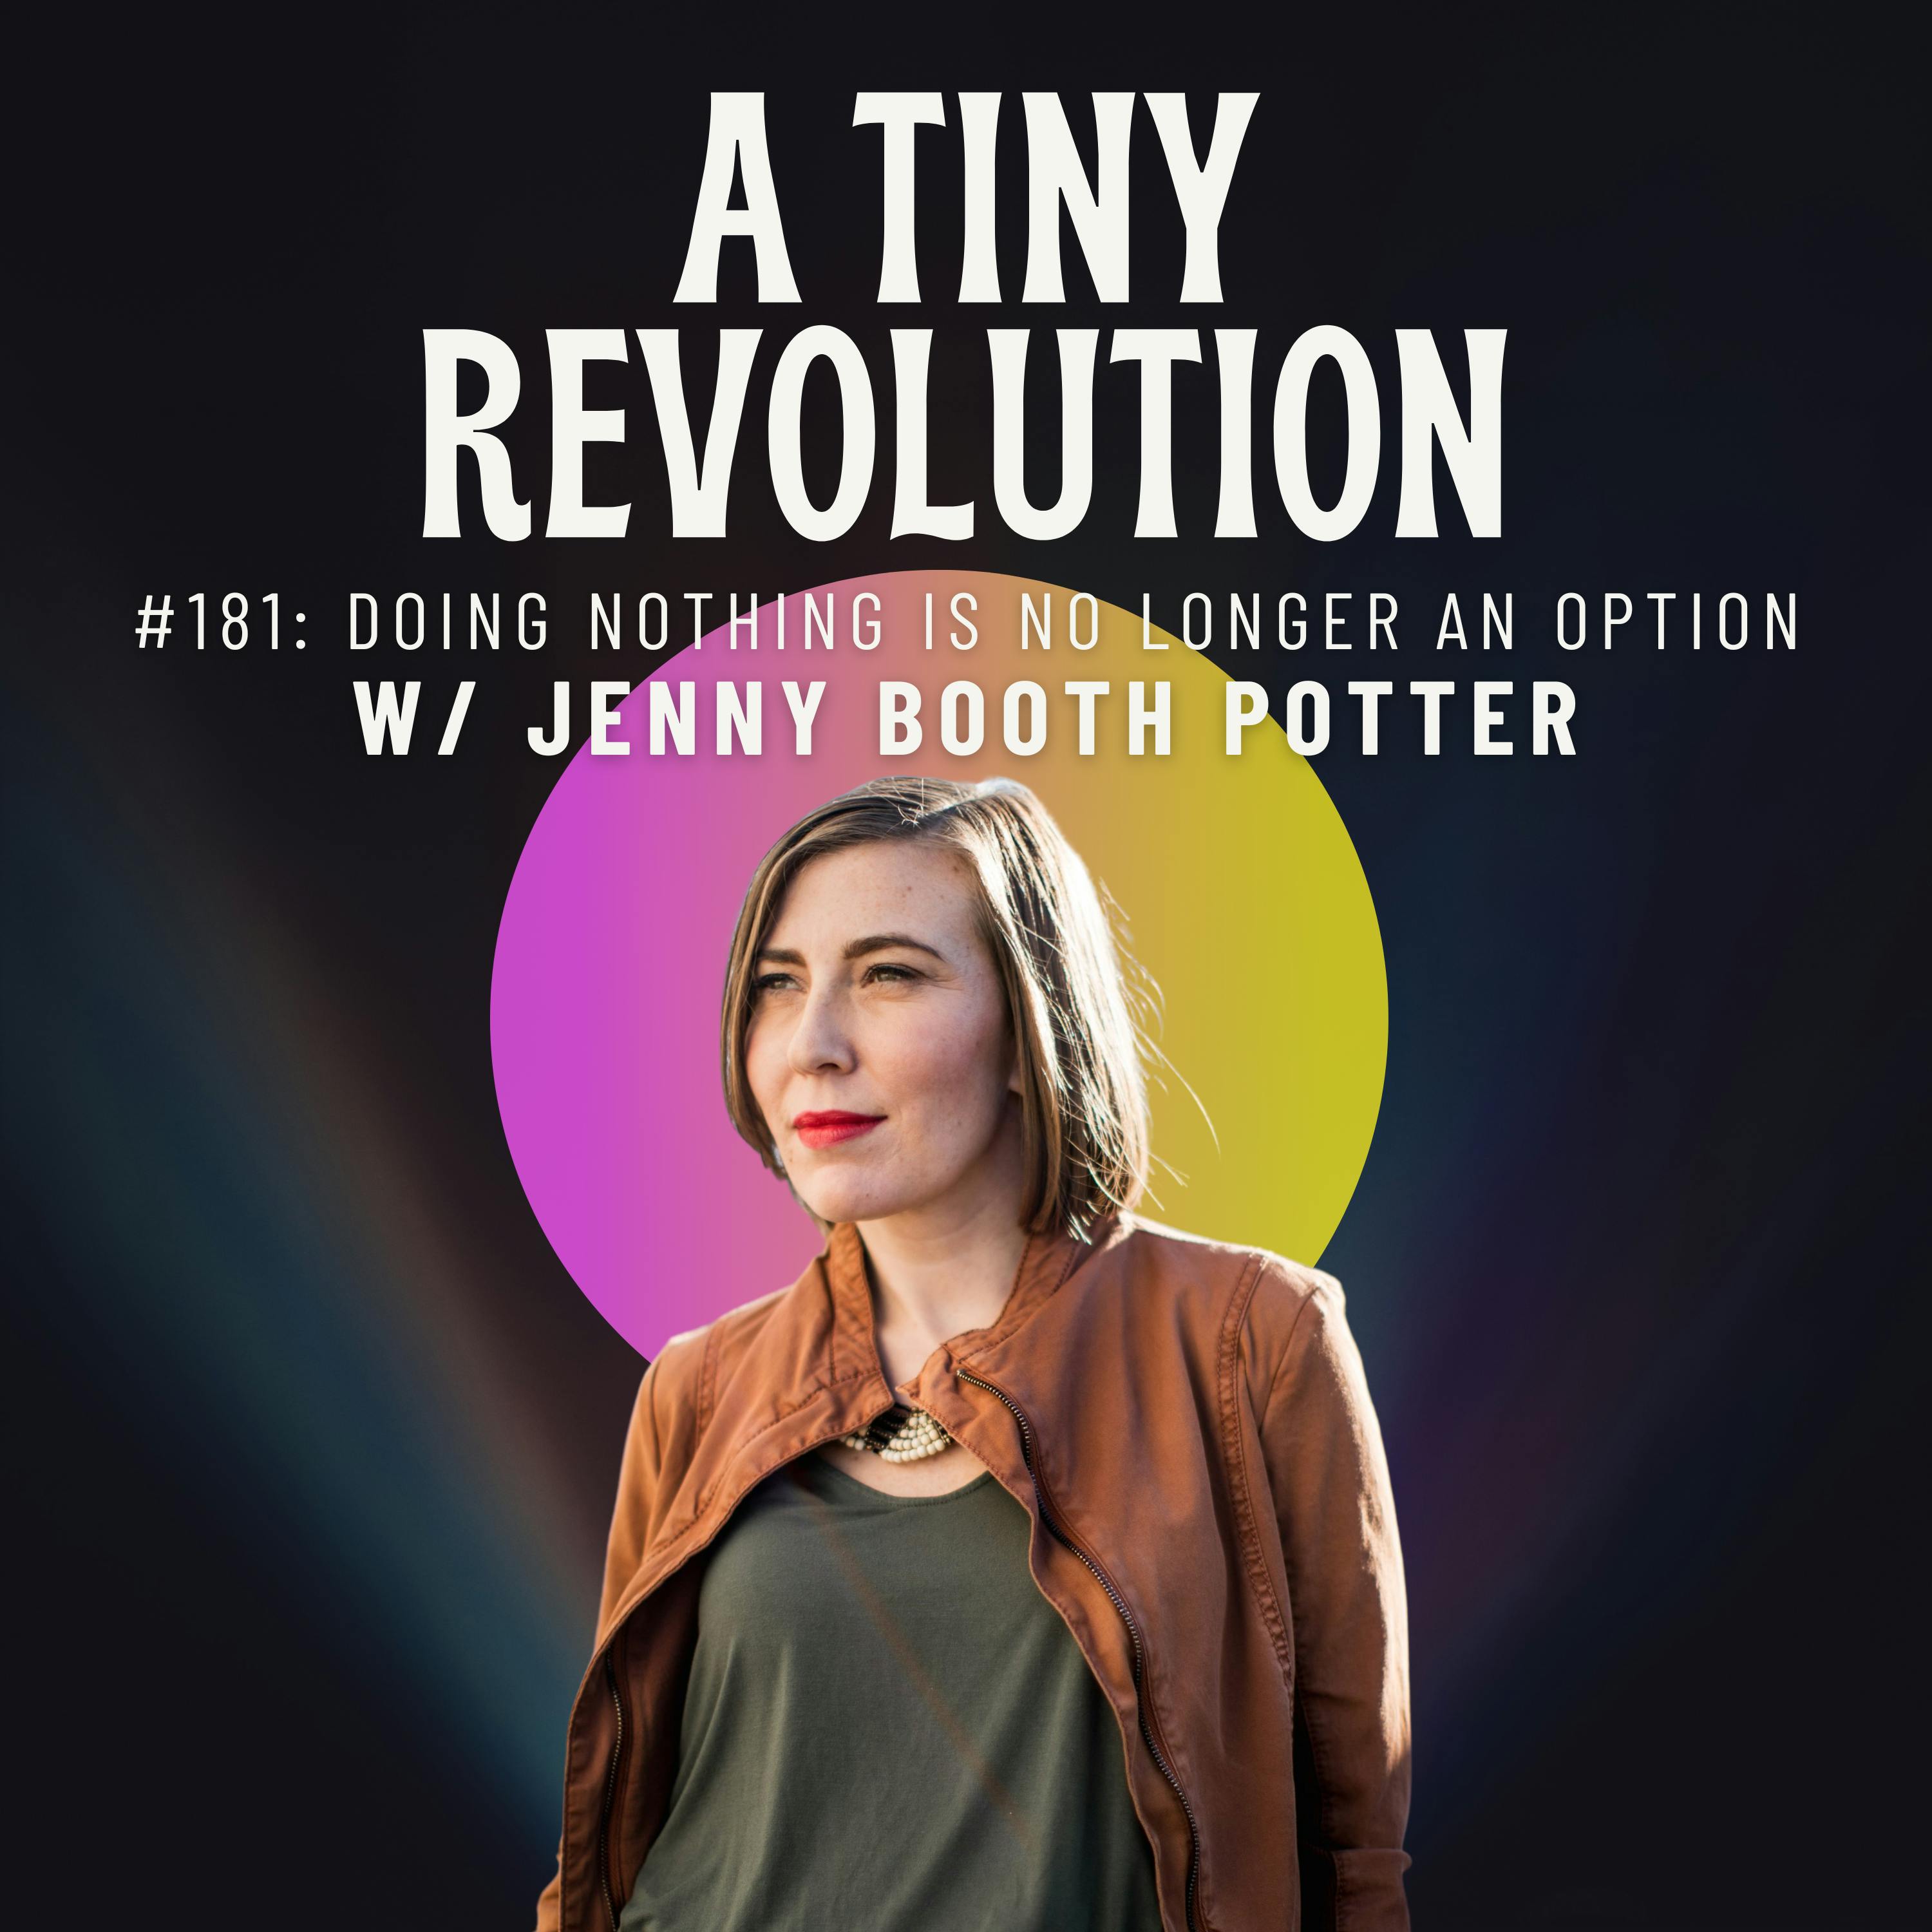 #181: Doing Nothing is No Longer an Option, w/ Jenny Booth Potter